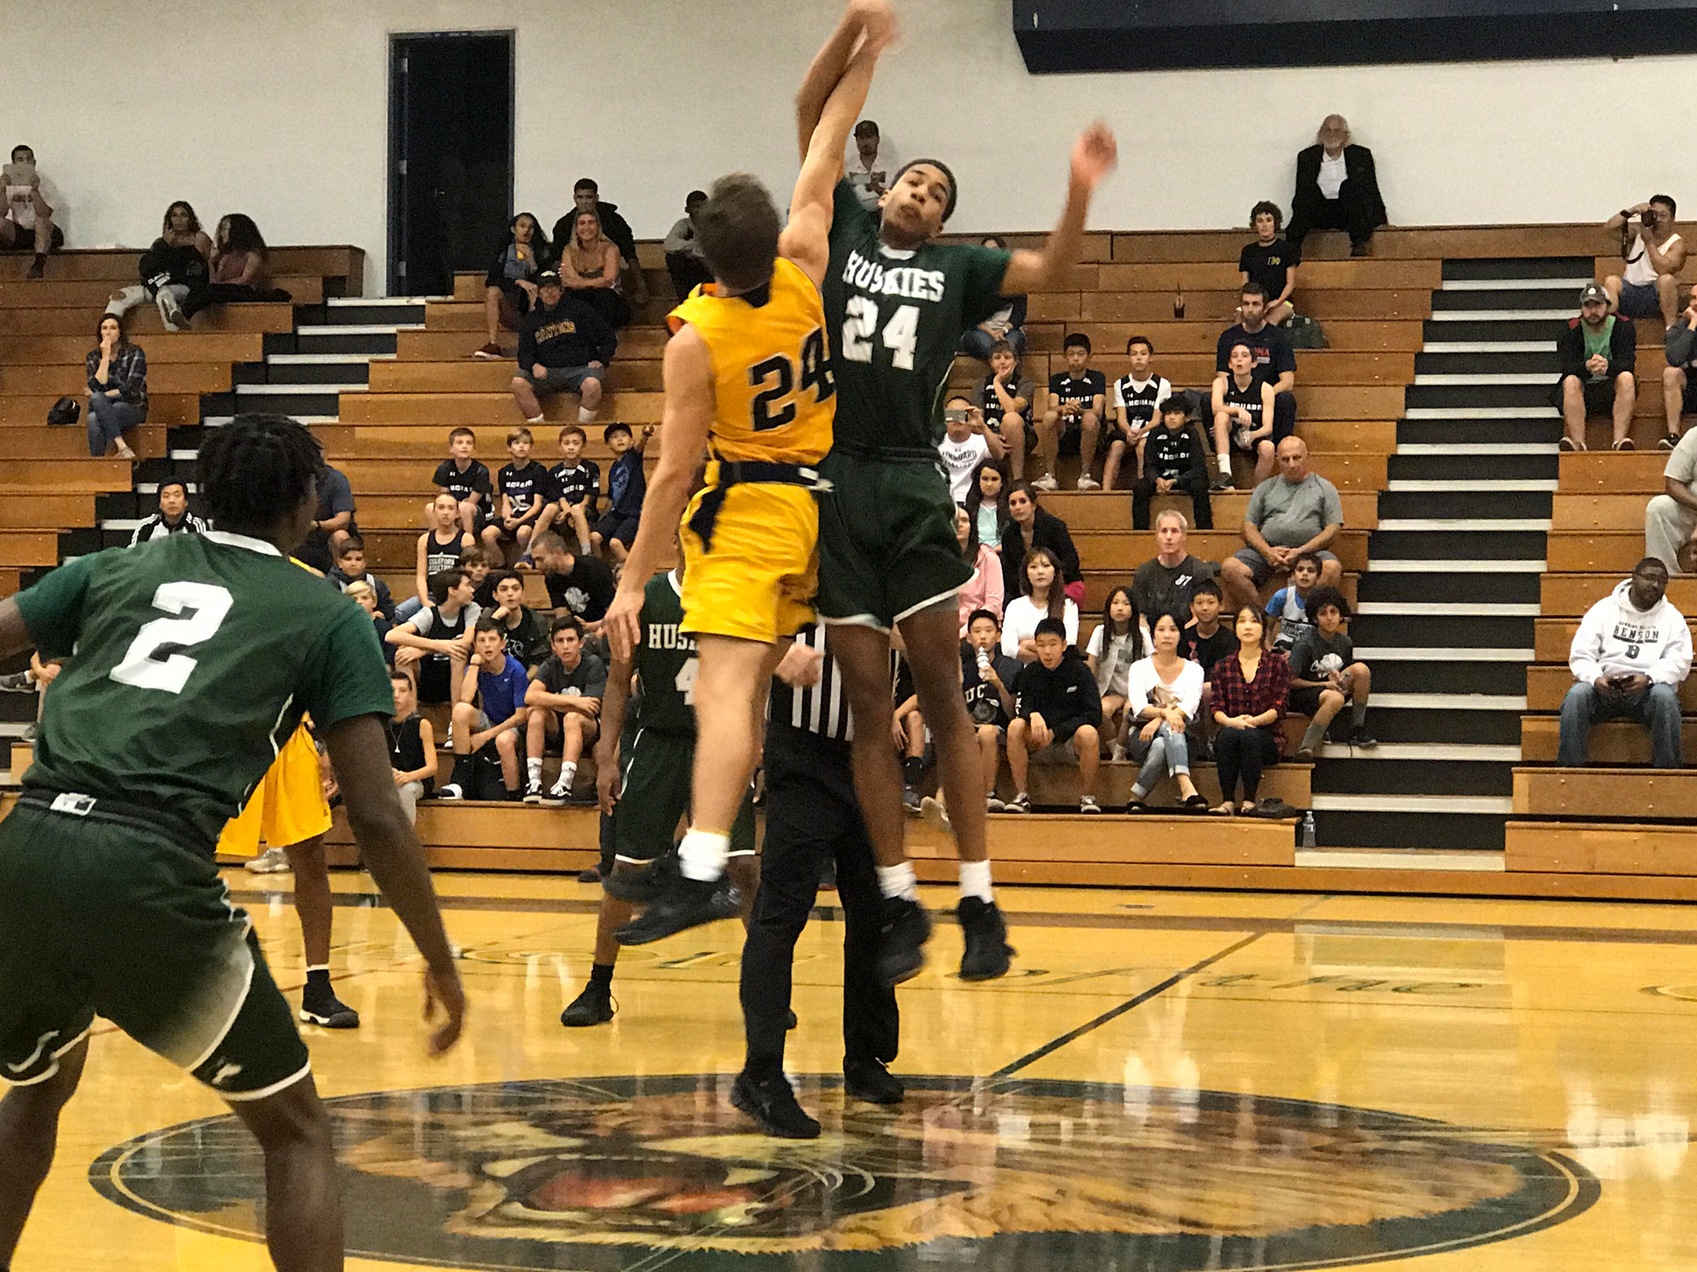 College of the Canyons vs. East L.A. College at 11th Annual 'Clash at Canyons' Tourney Nov. 1, 2018.